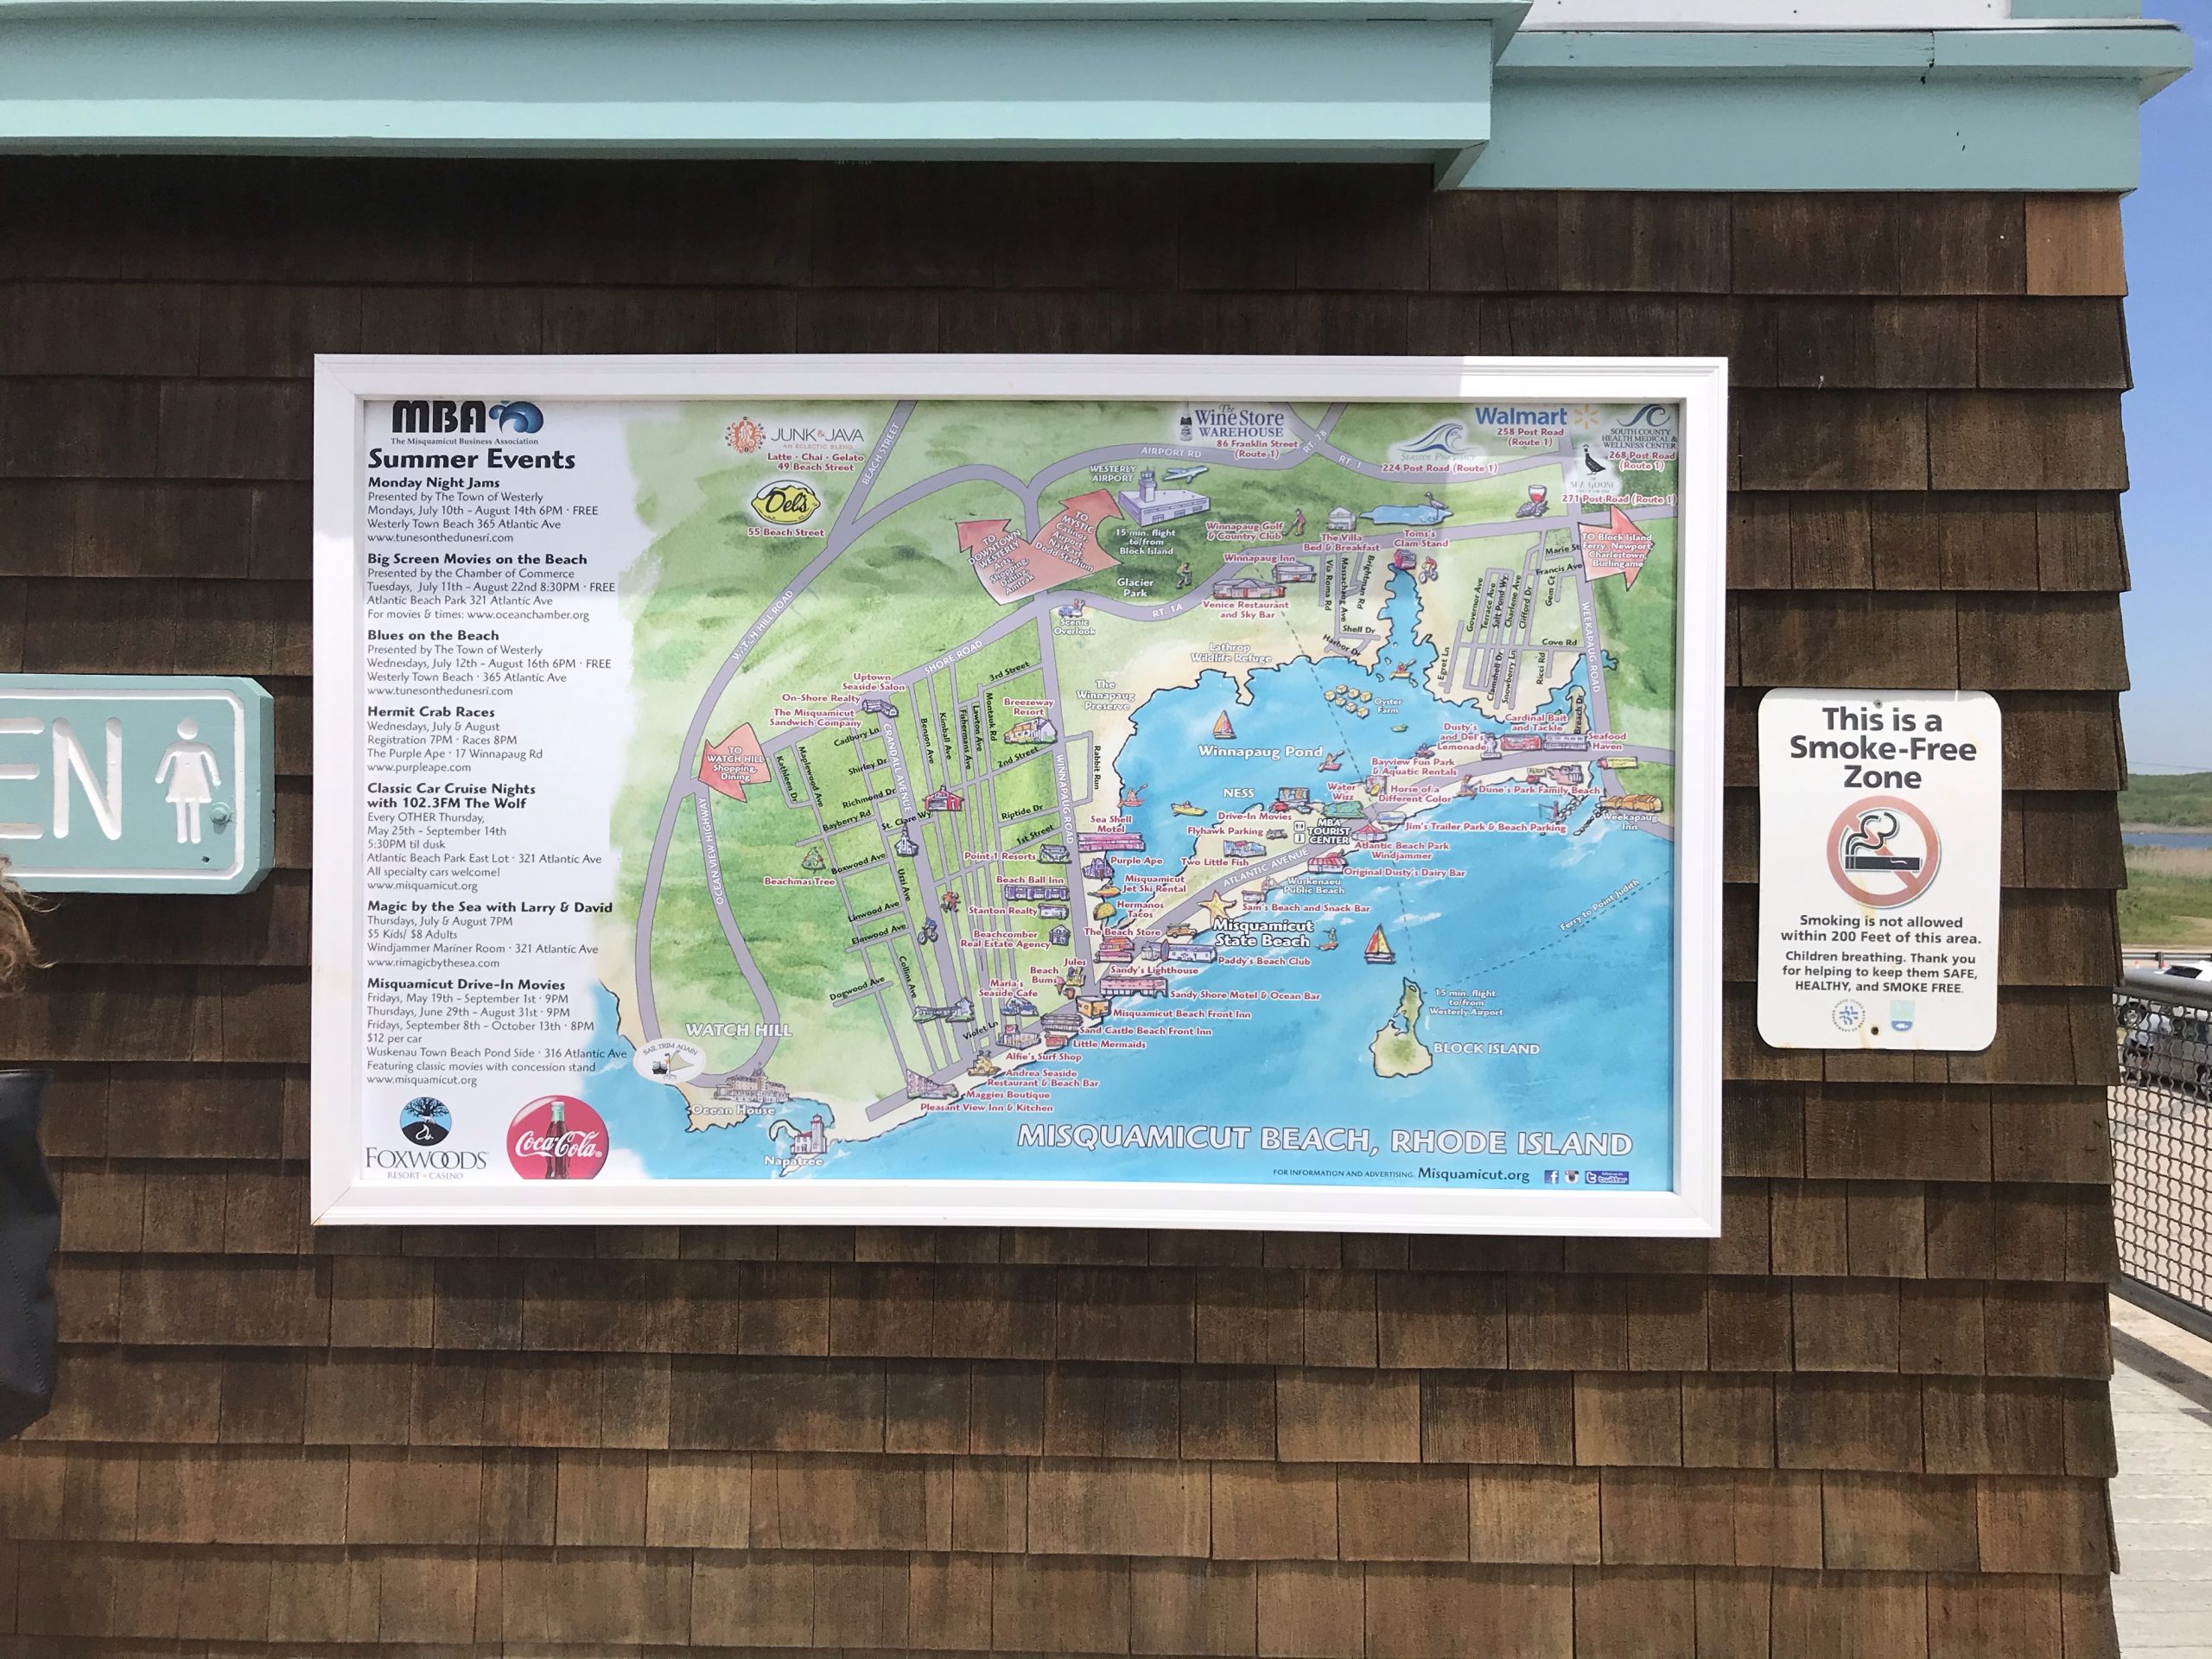 Misquamicut State Beach Westerly RI kid friendly activiteis and map posted